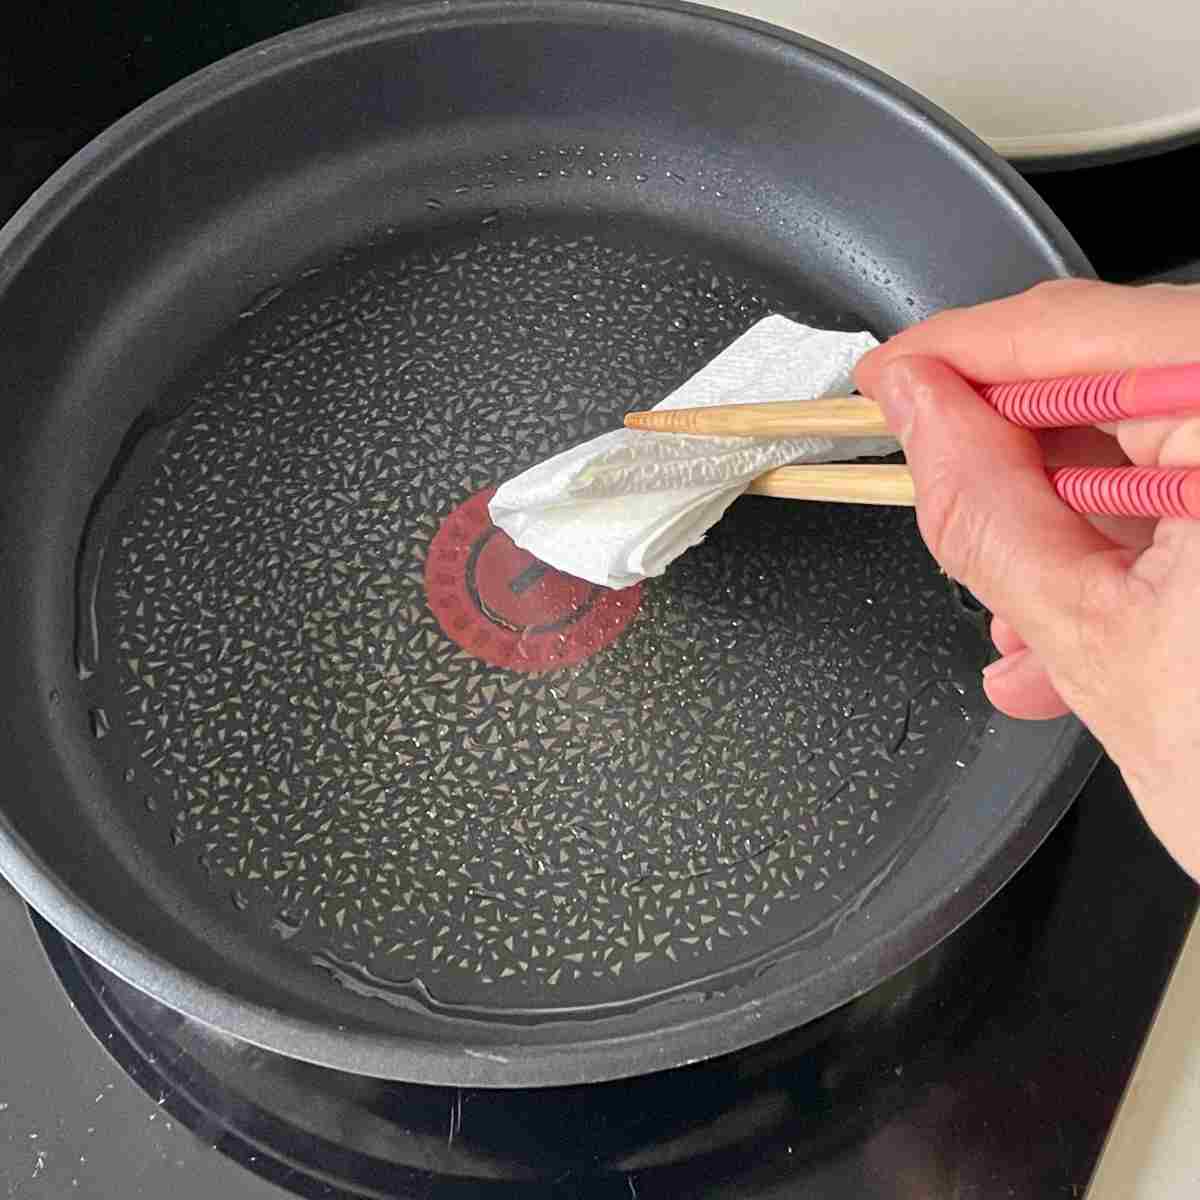 Remove excess oil in pan with paper towel